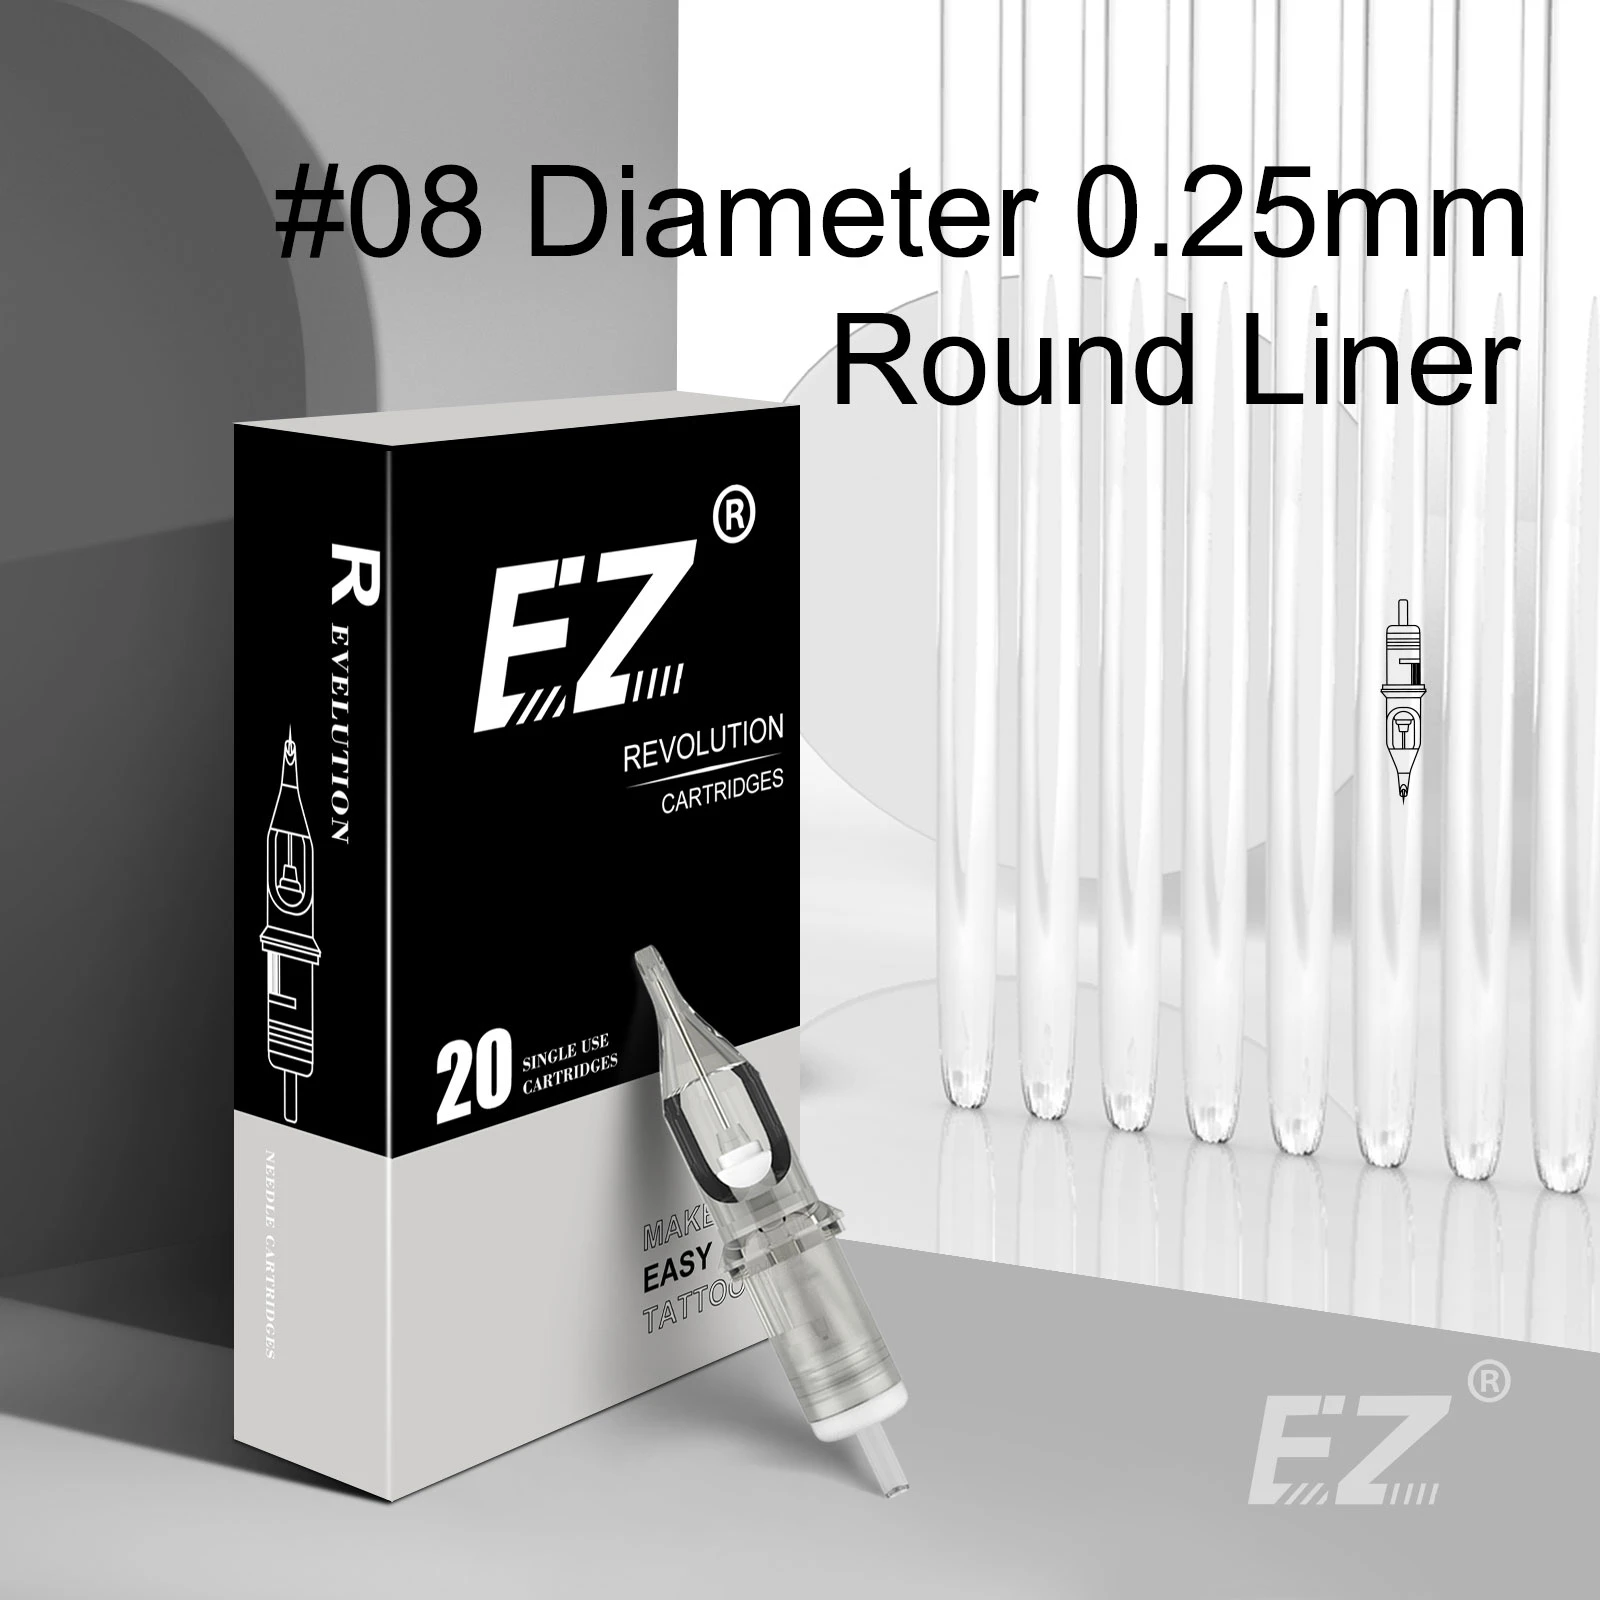 EZ Revolution Tattoo Needles Cartridge Round Liners #08 0.25mm for cartridge machine and grips 20 pcs /box